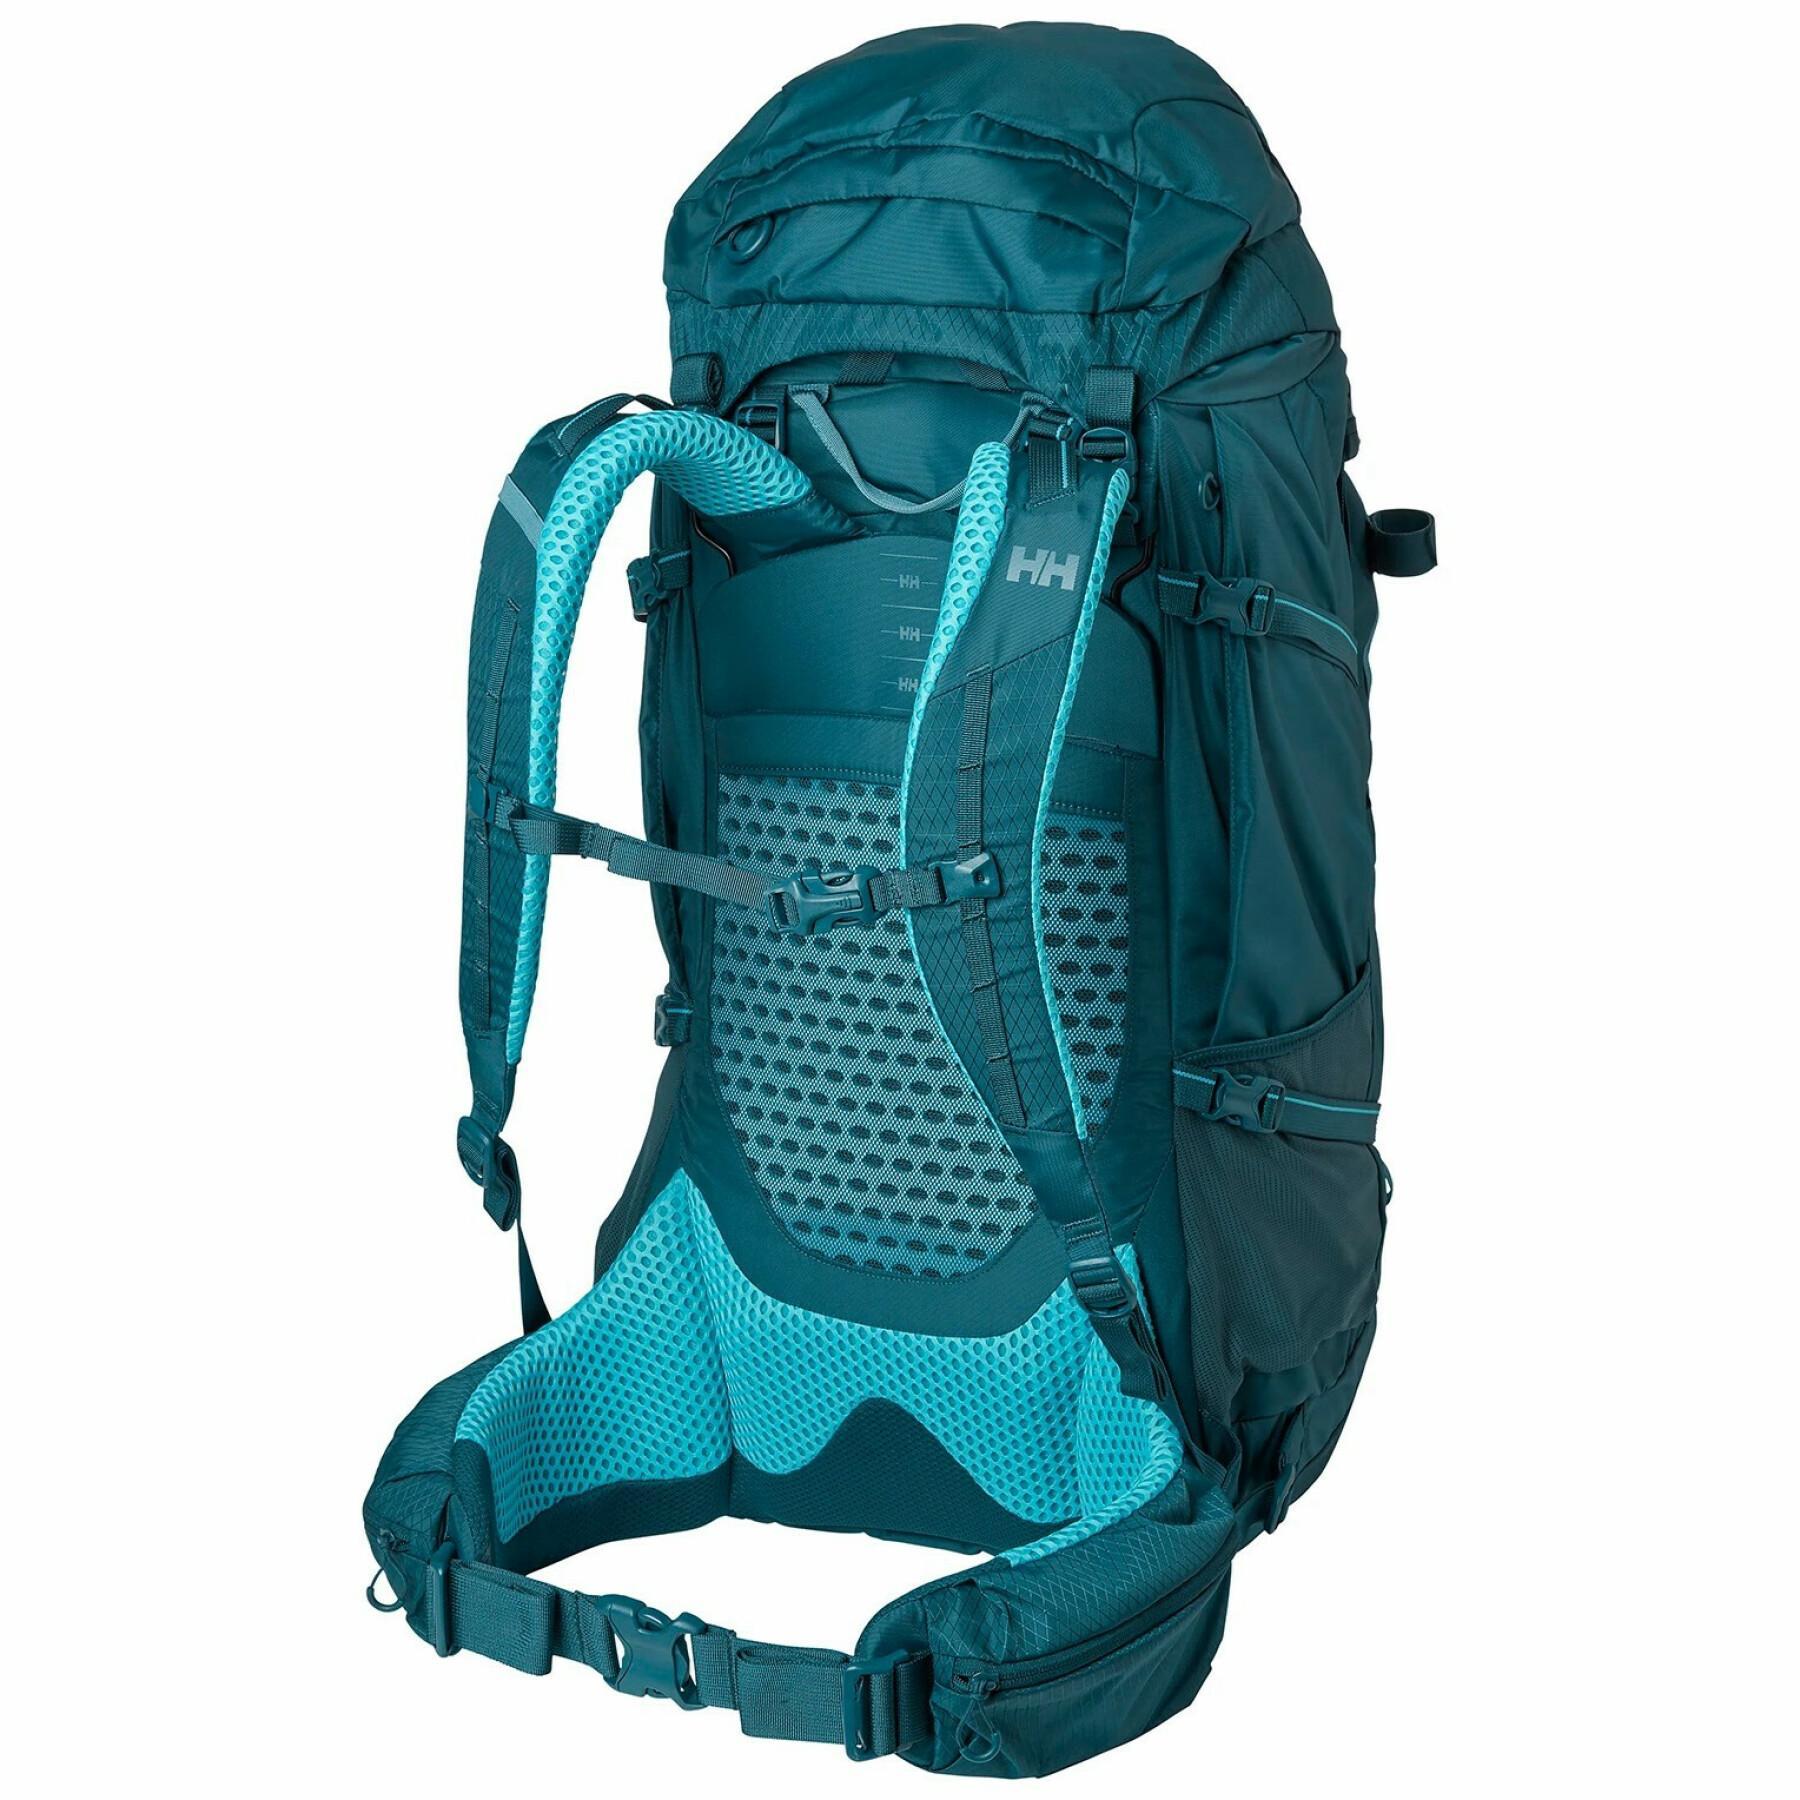 Backpack Helly Hansen capacitor